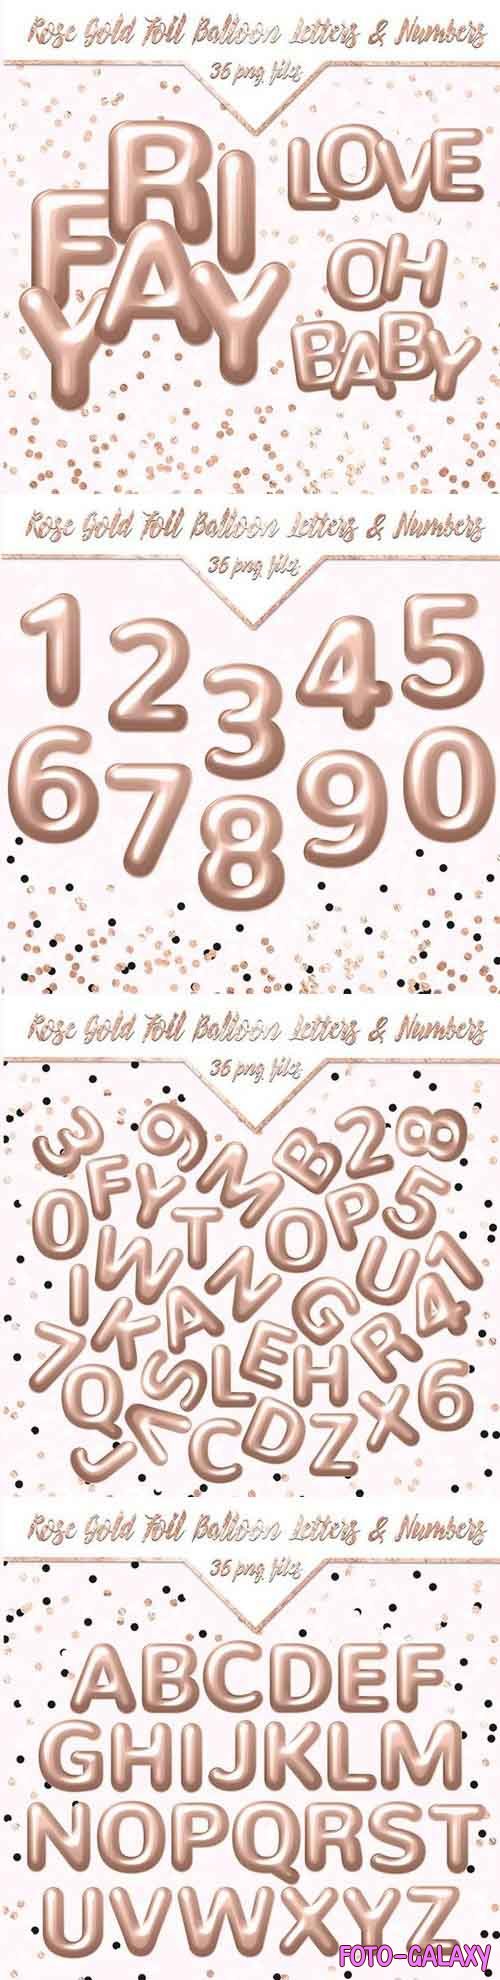 Rose Gold Foil Balloon Letters & Numbers - 1158291